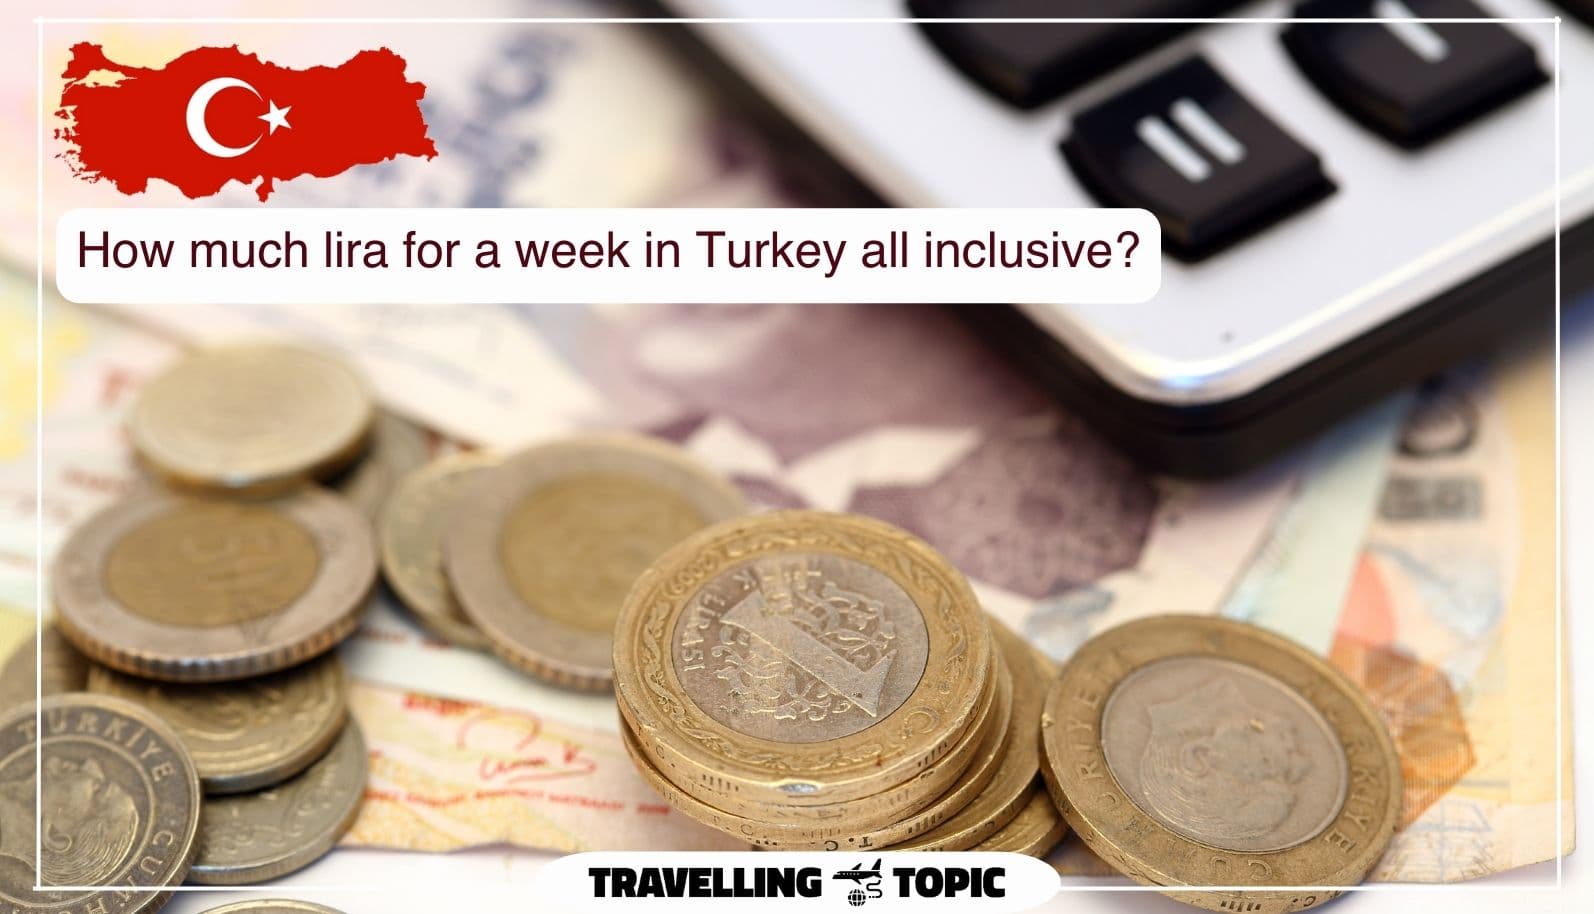 How much lira for a week in Turkey all inclusive?